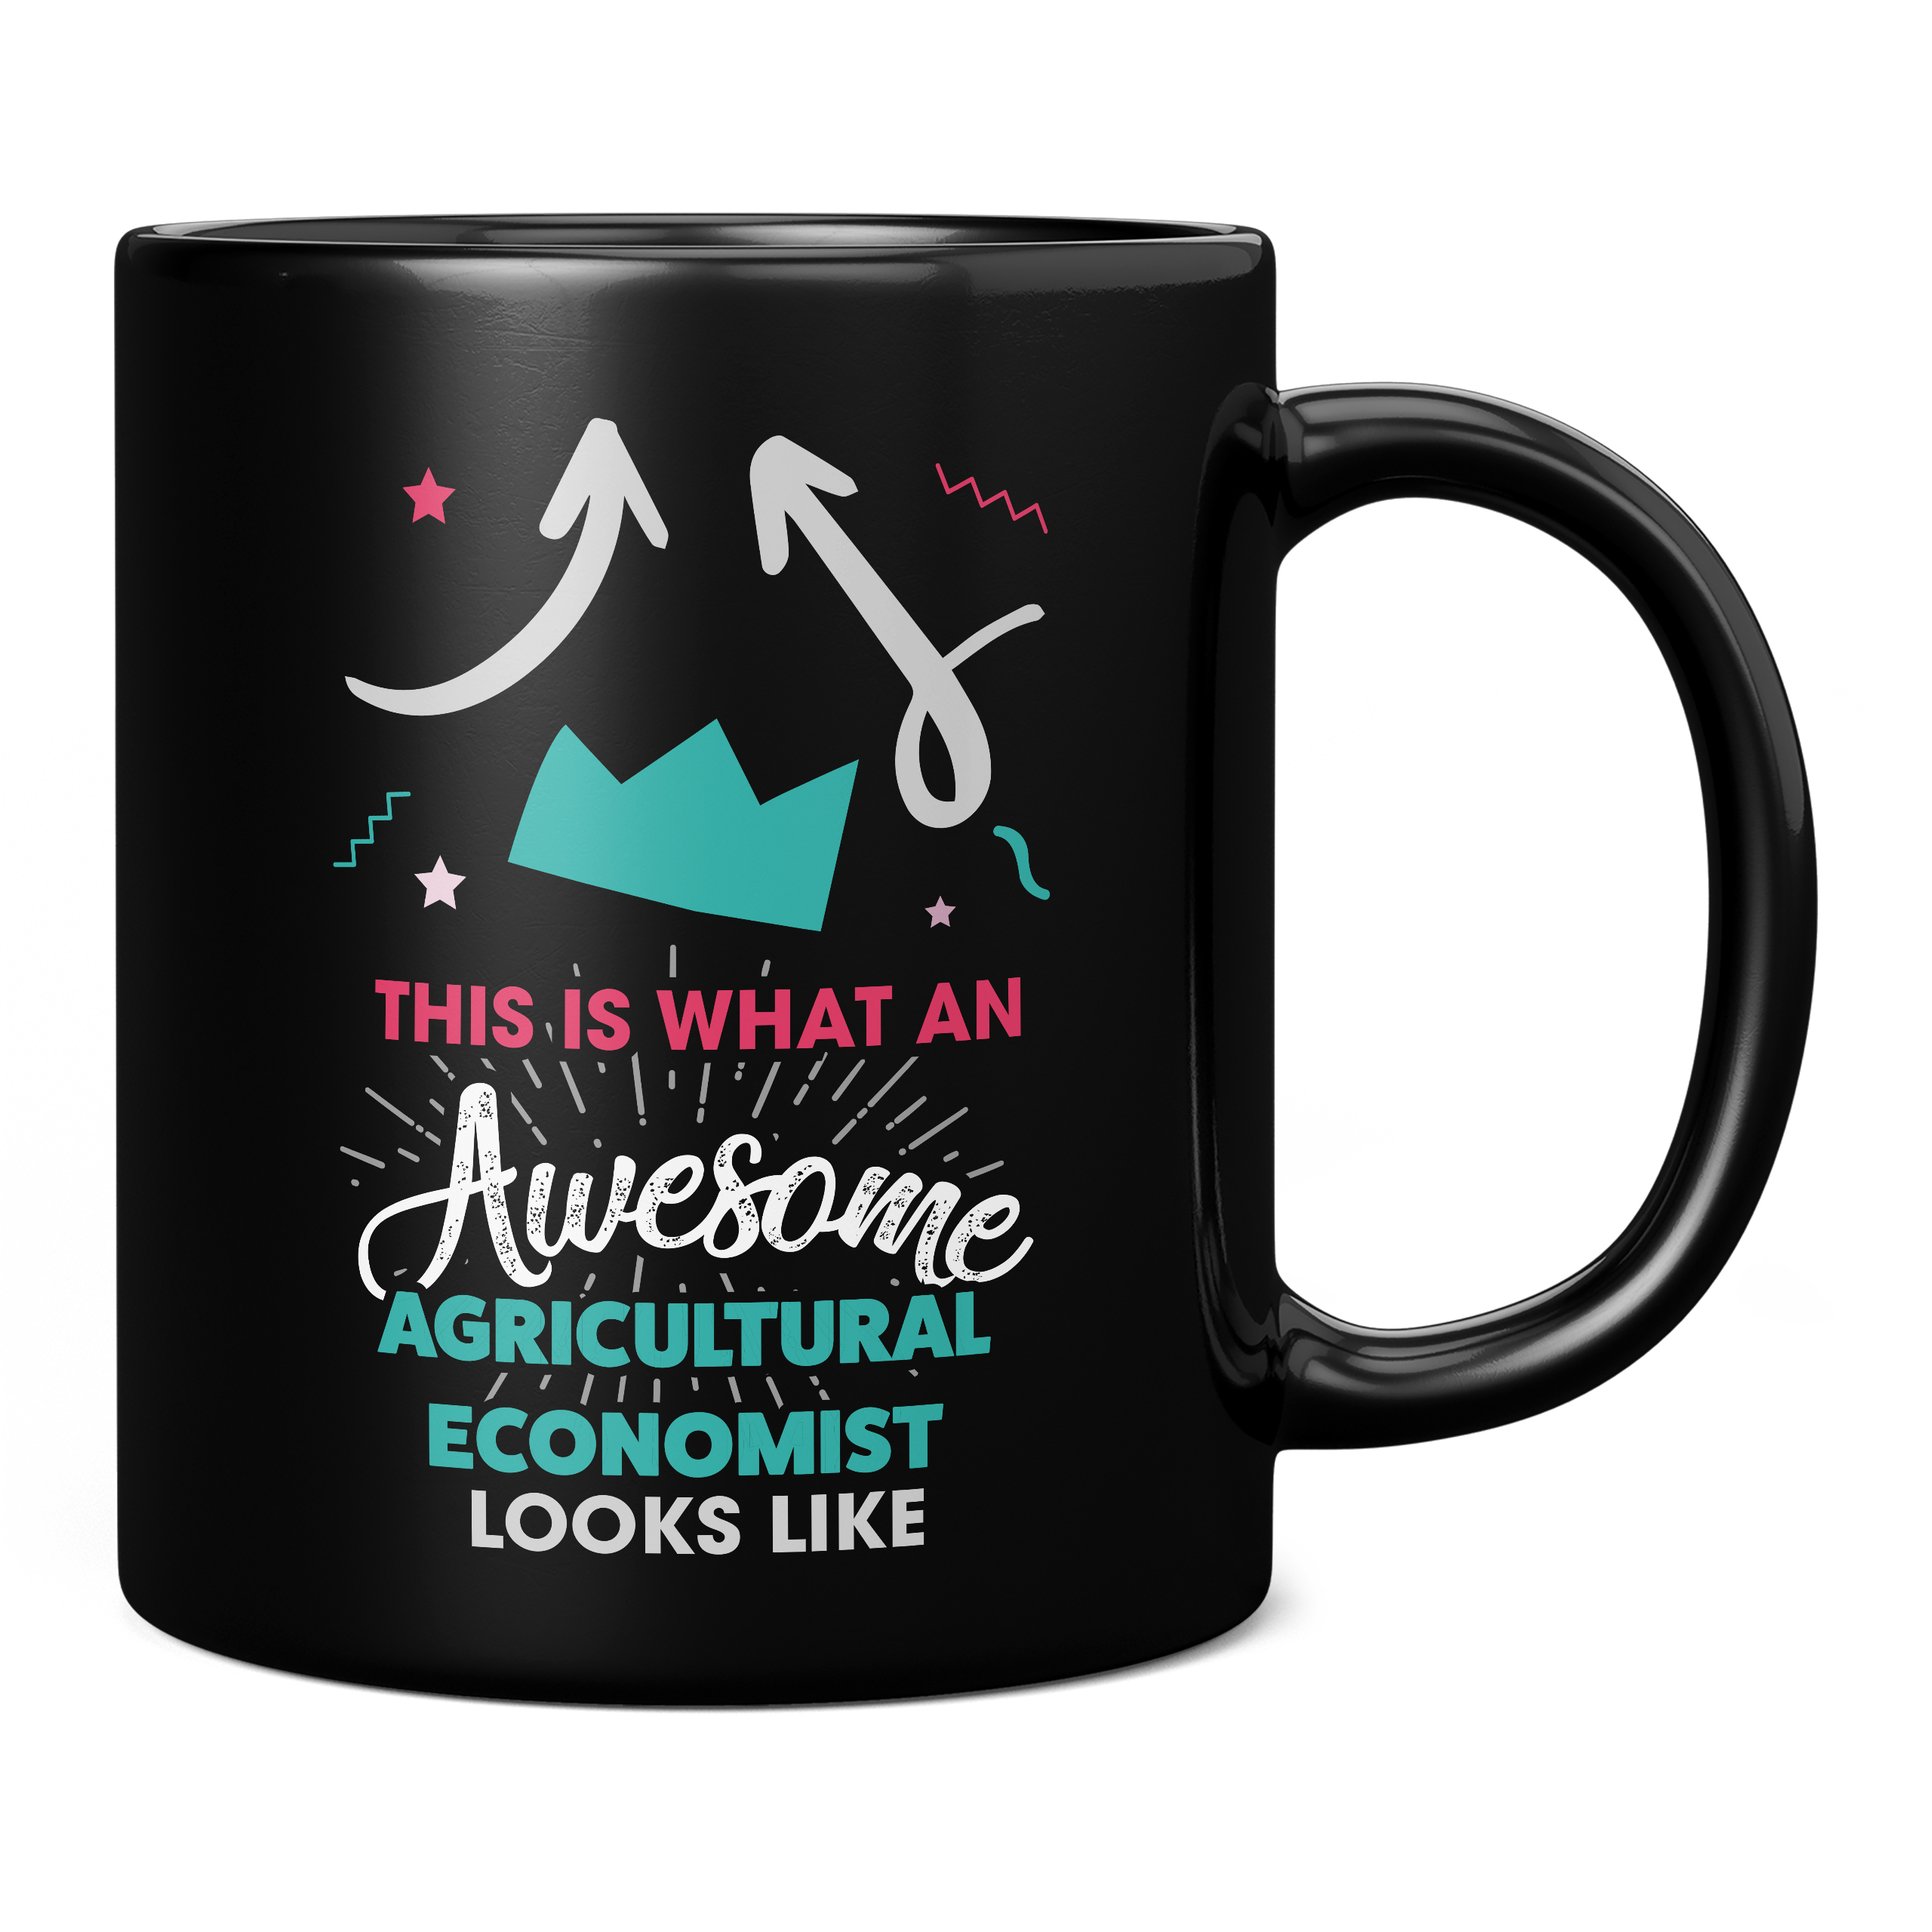 THIS IS WHAT AN AWESOME AGRICULTURAL ECONOMIST LOOKS LIKE 11OZ NOVELTY MUG